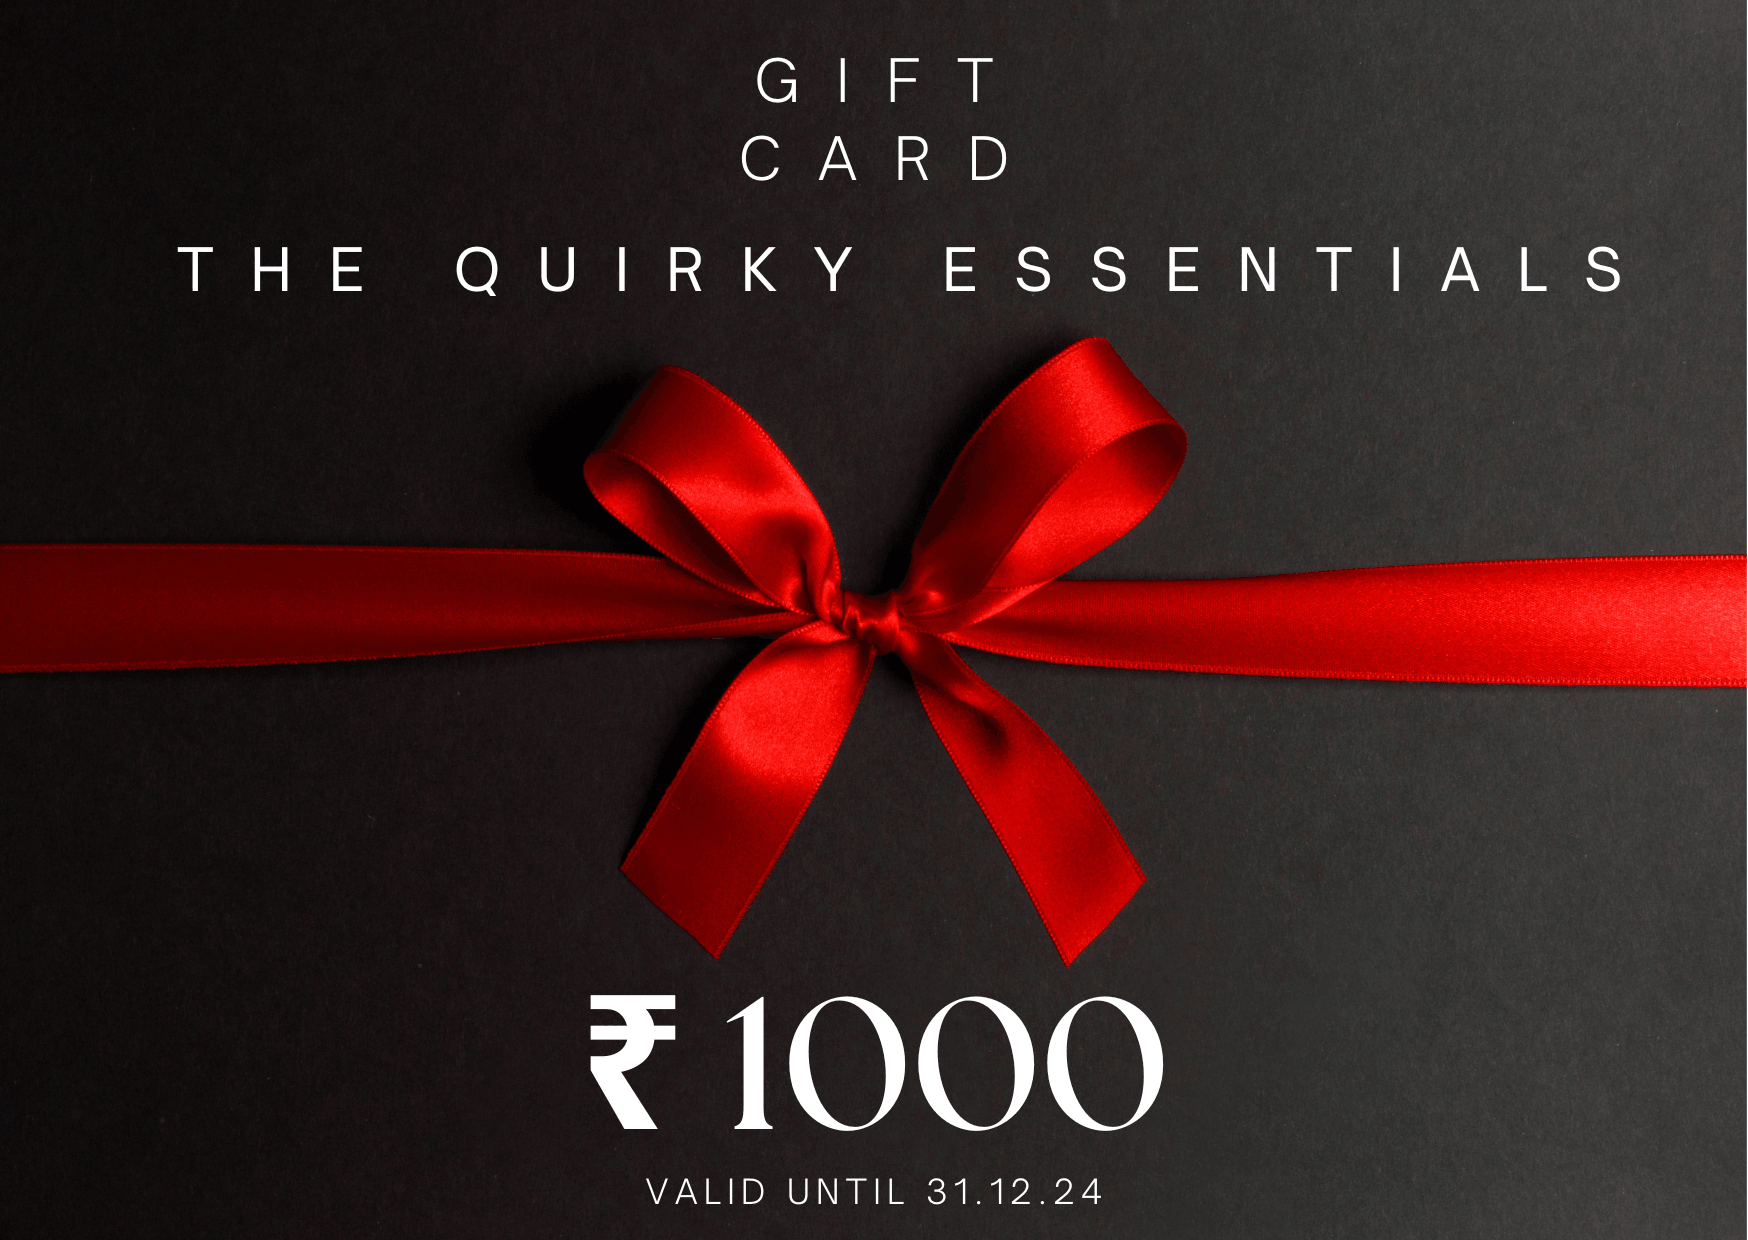 The quirky essentials gift card - The Quirky Essentials